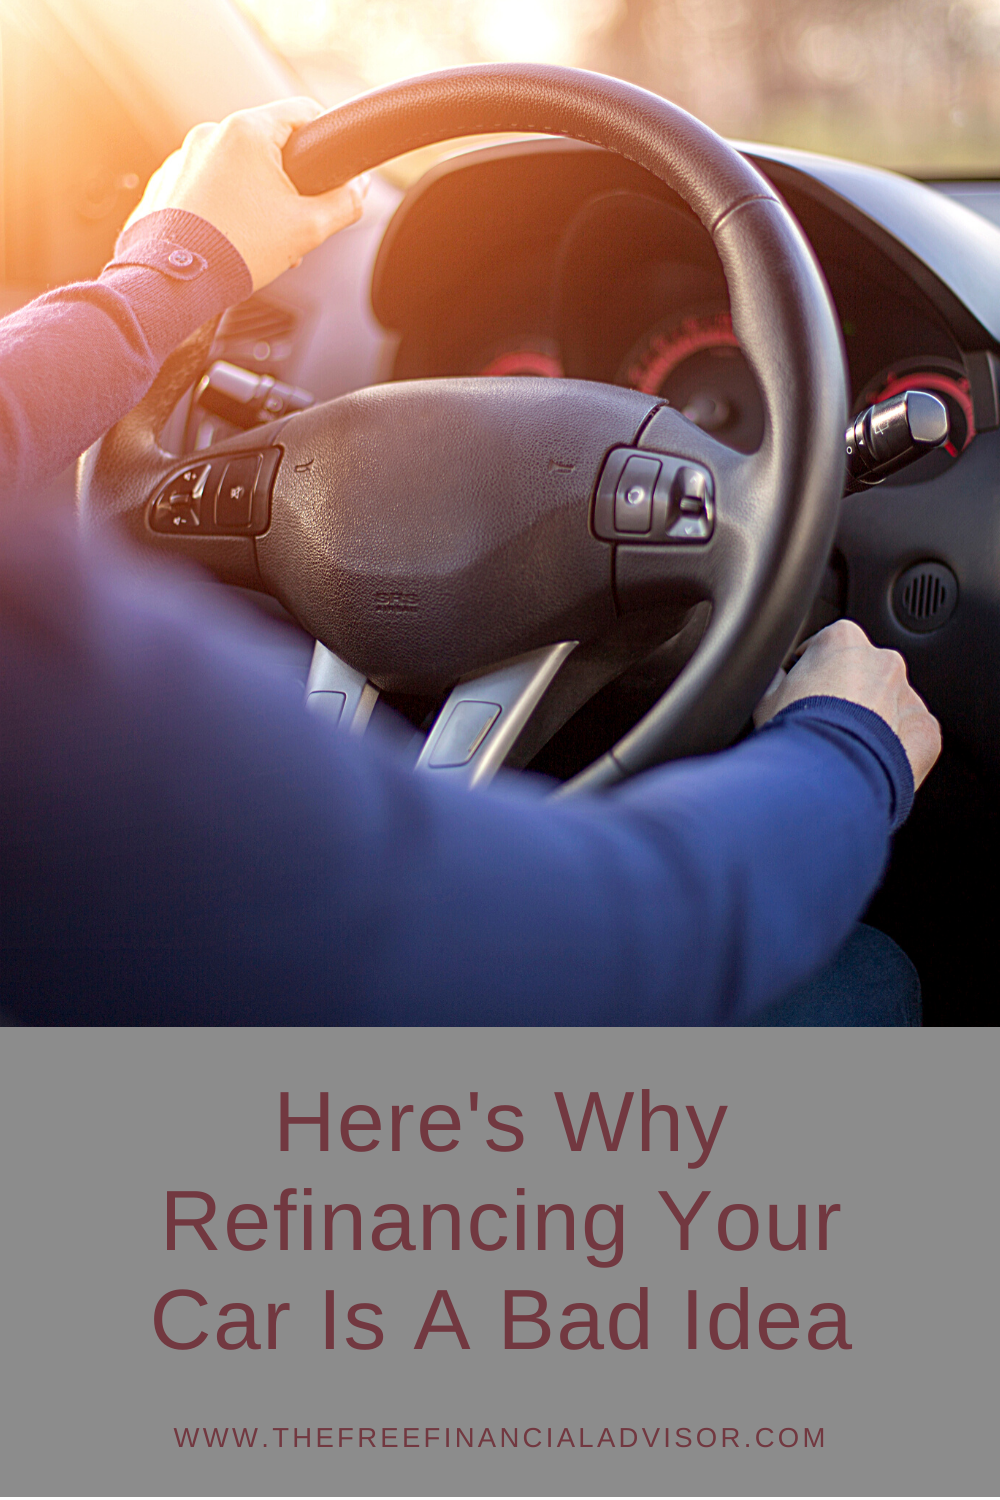 Here's Why Refinancing Your Car Is A Bad Idea